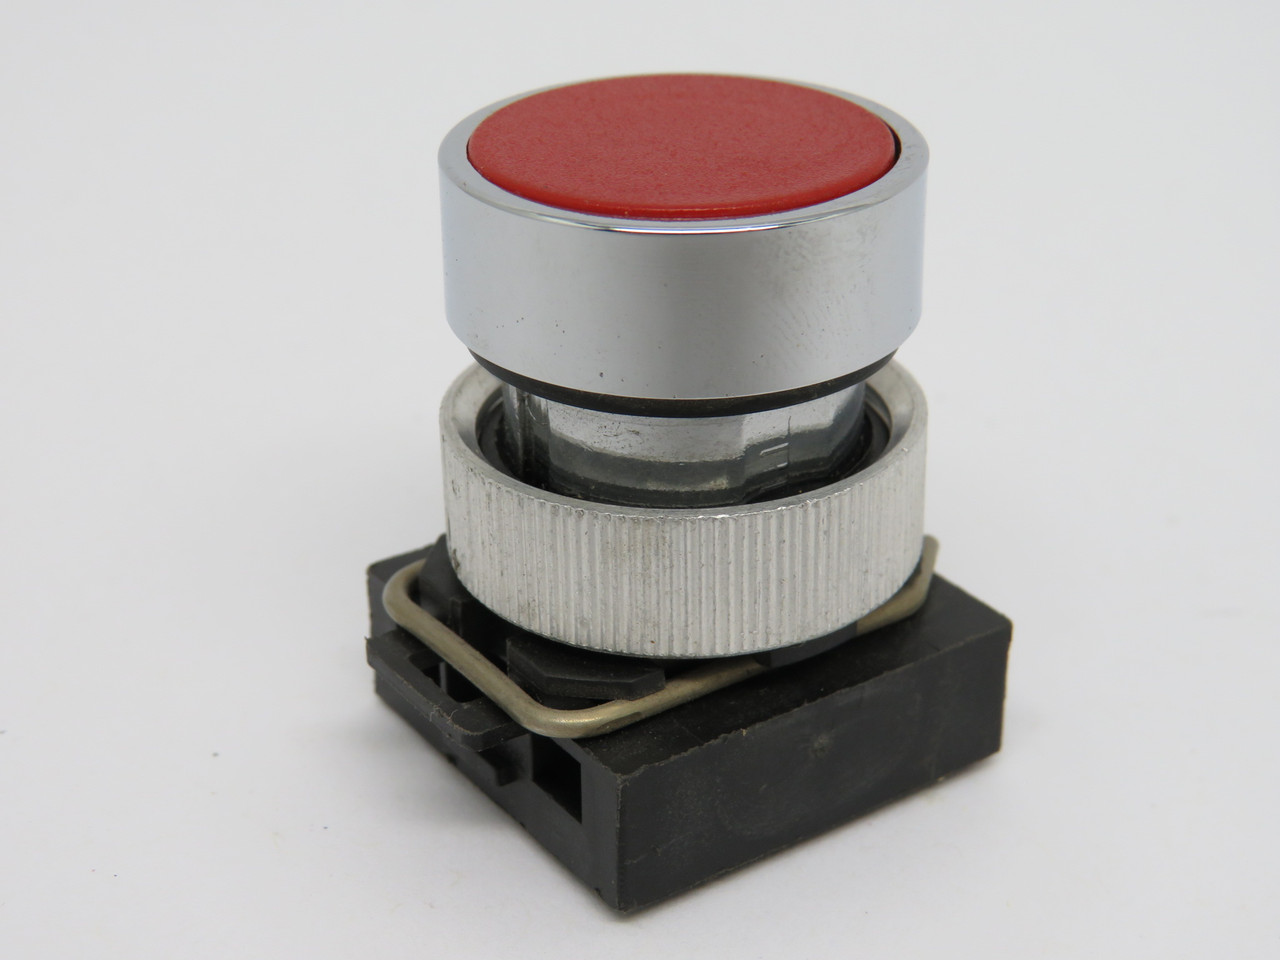 ERSCE ER506020 Flush Push Button w/Ring Red Cap 22mm USED